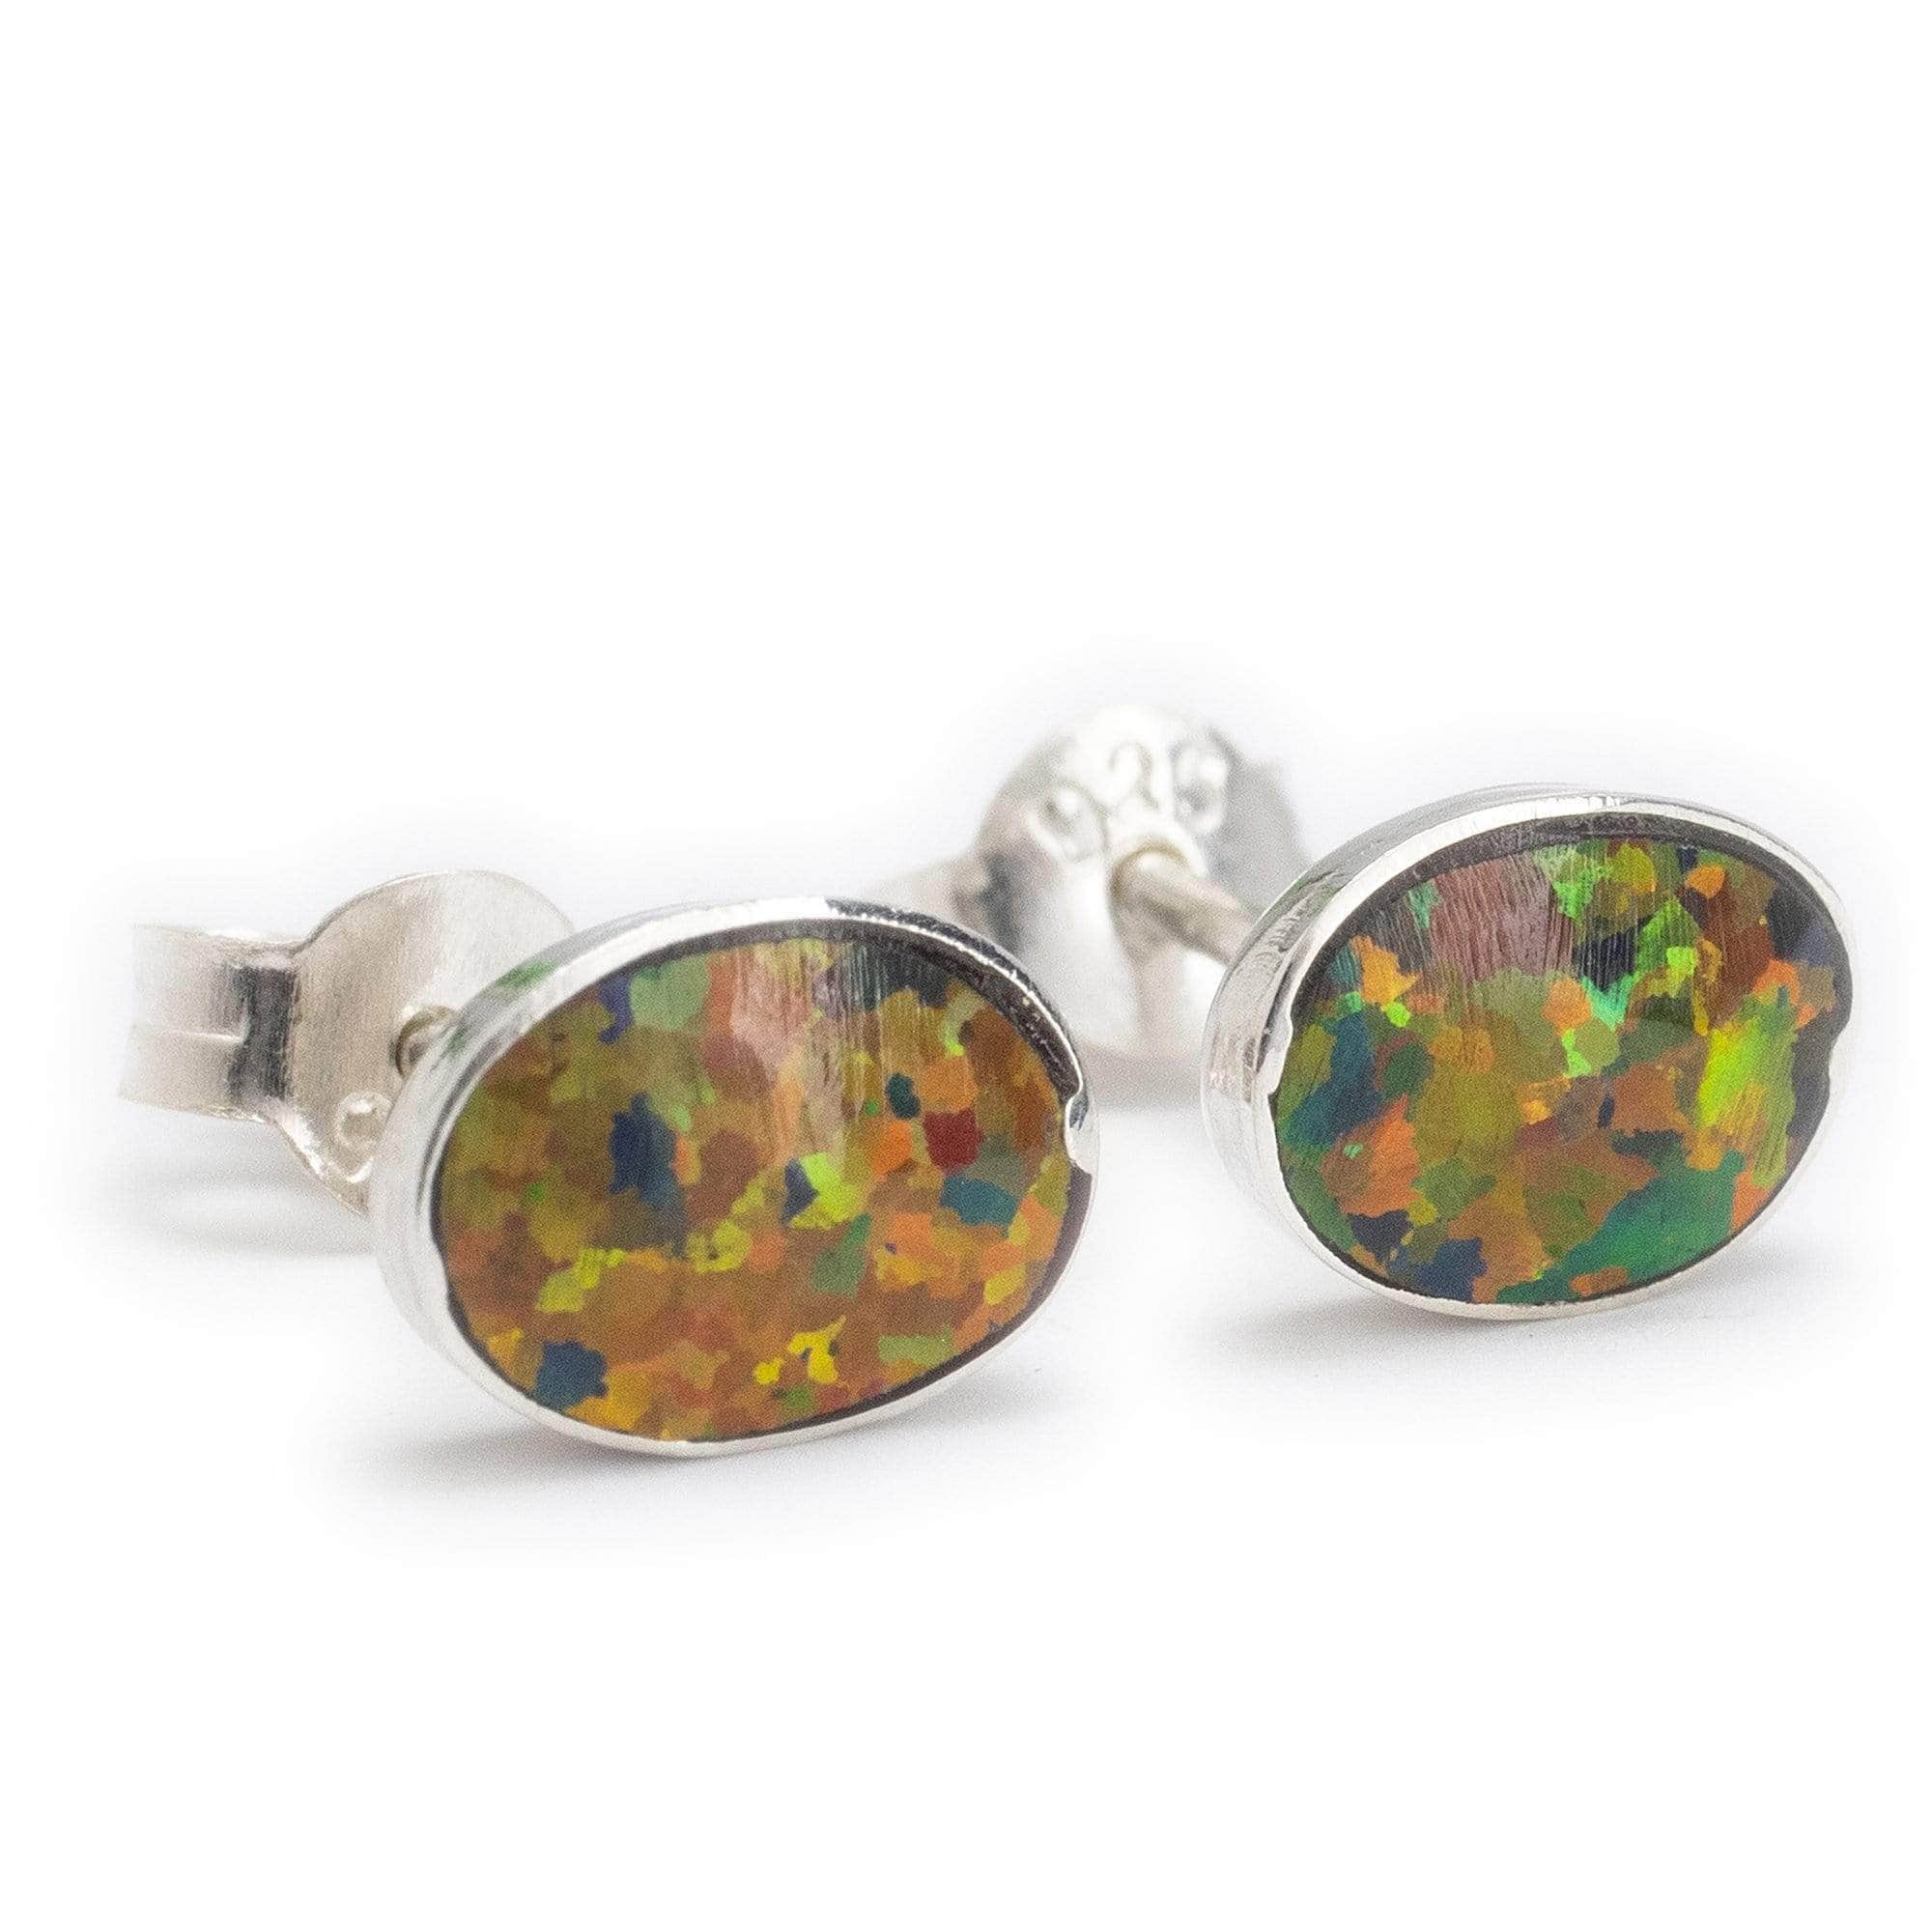 Kalifano Southwest Silver Jewelry Rainbow Opal Oval 925 Sterling Silver Earring with Stud Backing Handmade NME.0028.RO